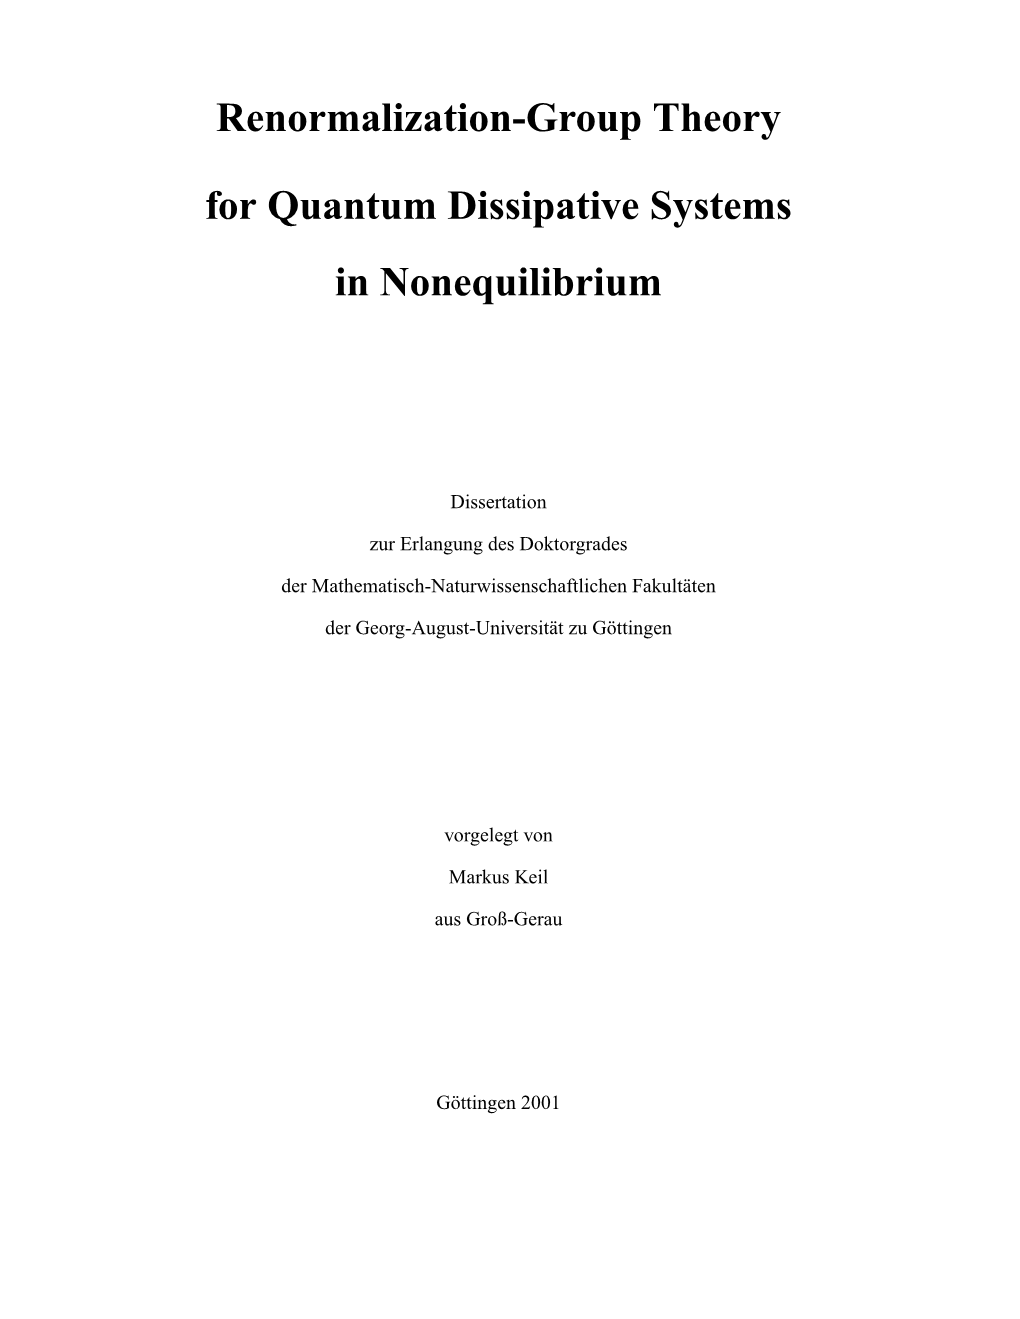 Renormalization-Group Theory for Quantum Dissipative Systems in Nonequilibrium